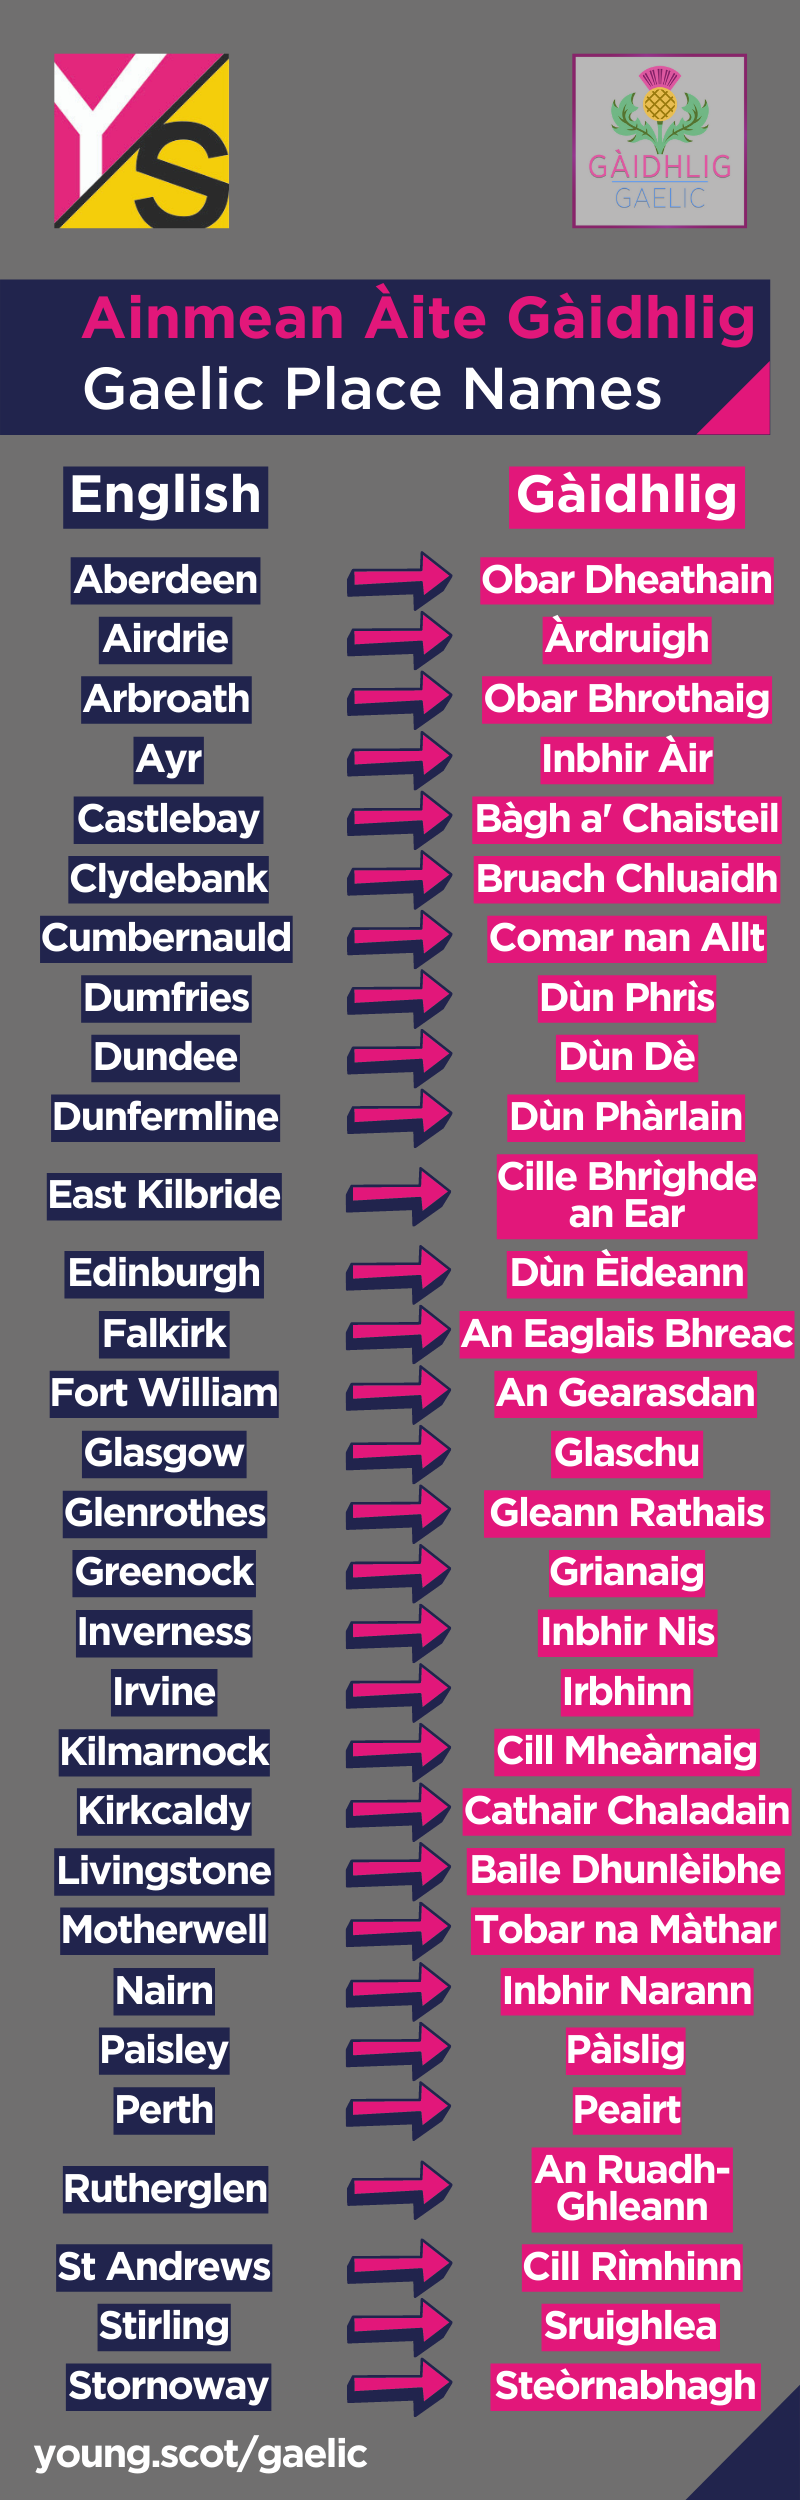 A list of 30 places in Scotland with the English names on the leftnand the Gaelic translations on the right